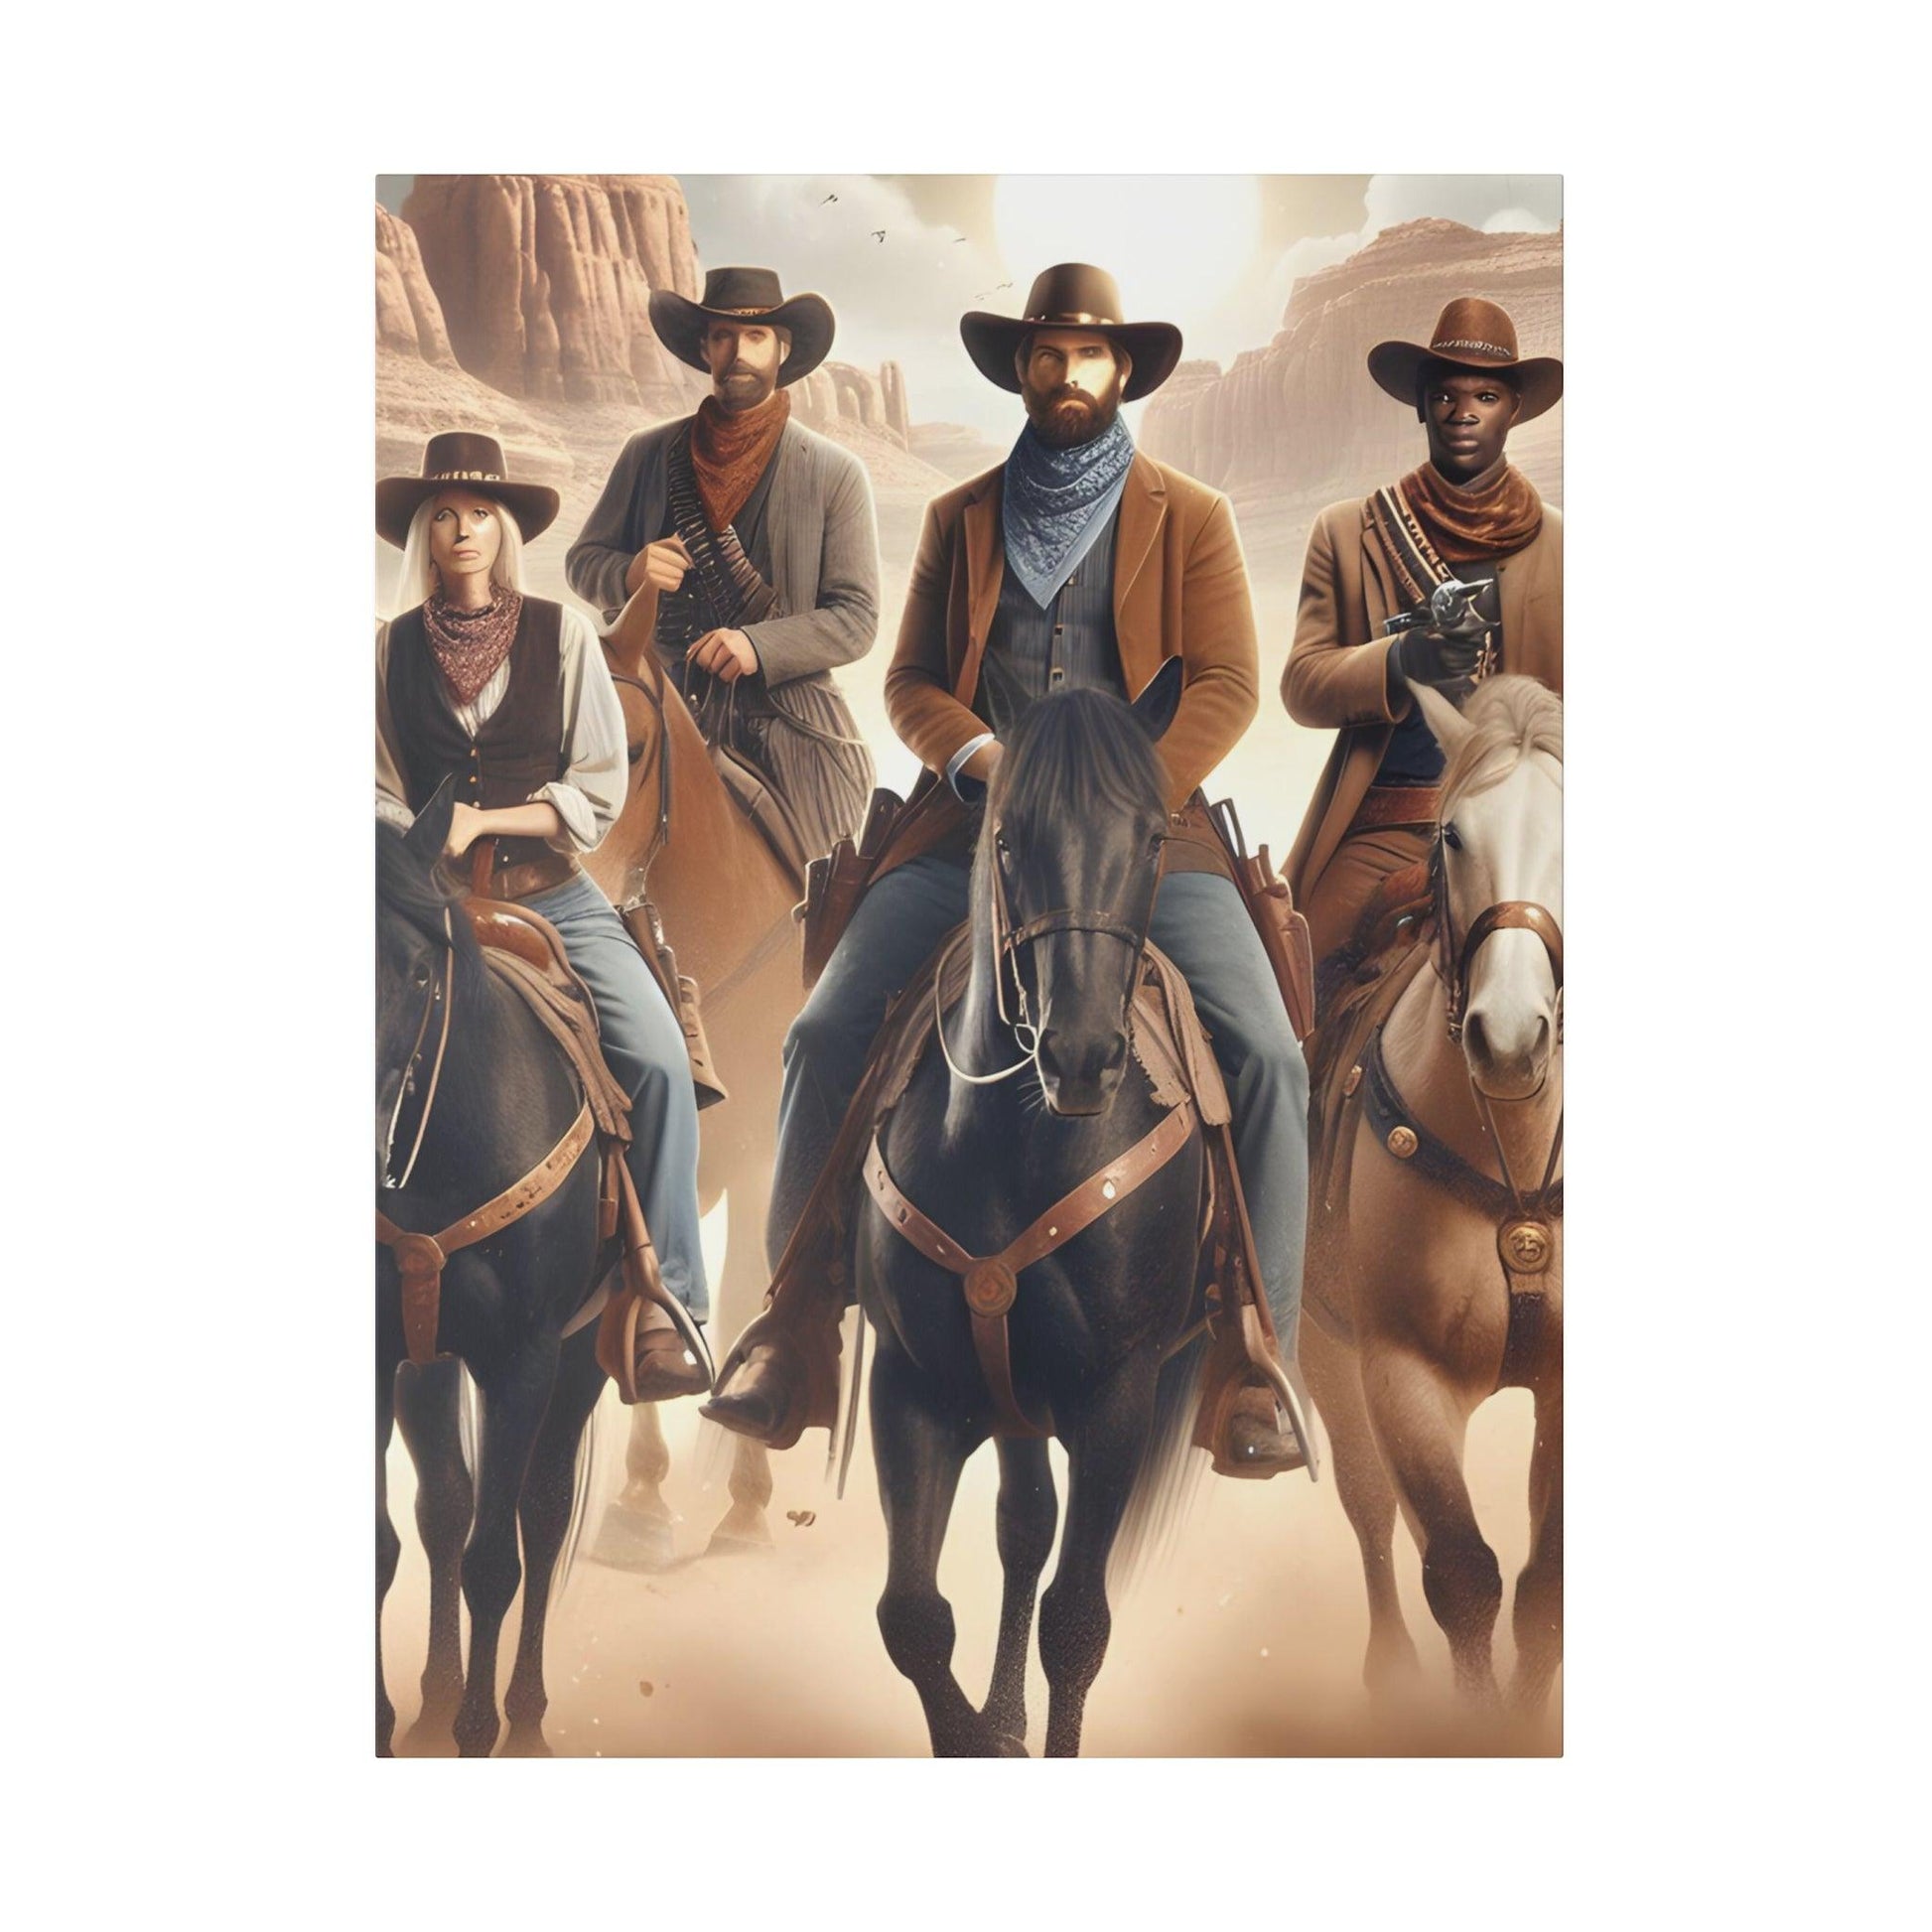 "Cowboy Chronicles: Timeless Canvas Wall Art" - The Alice Gallery